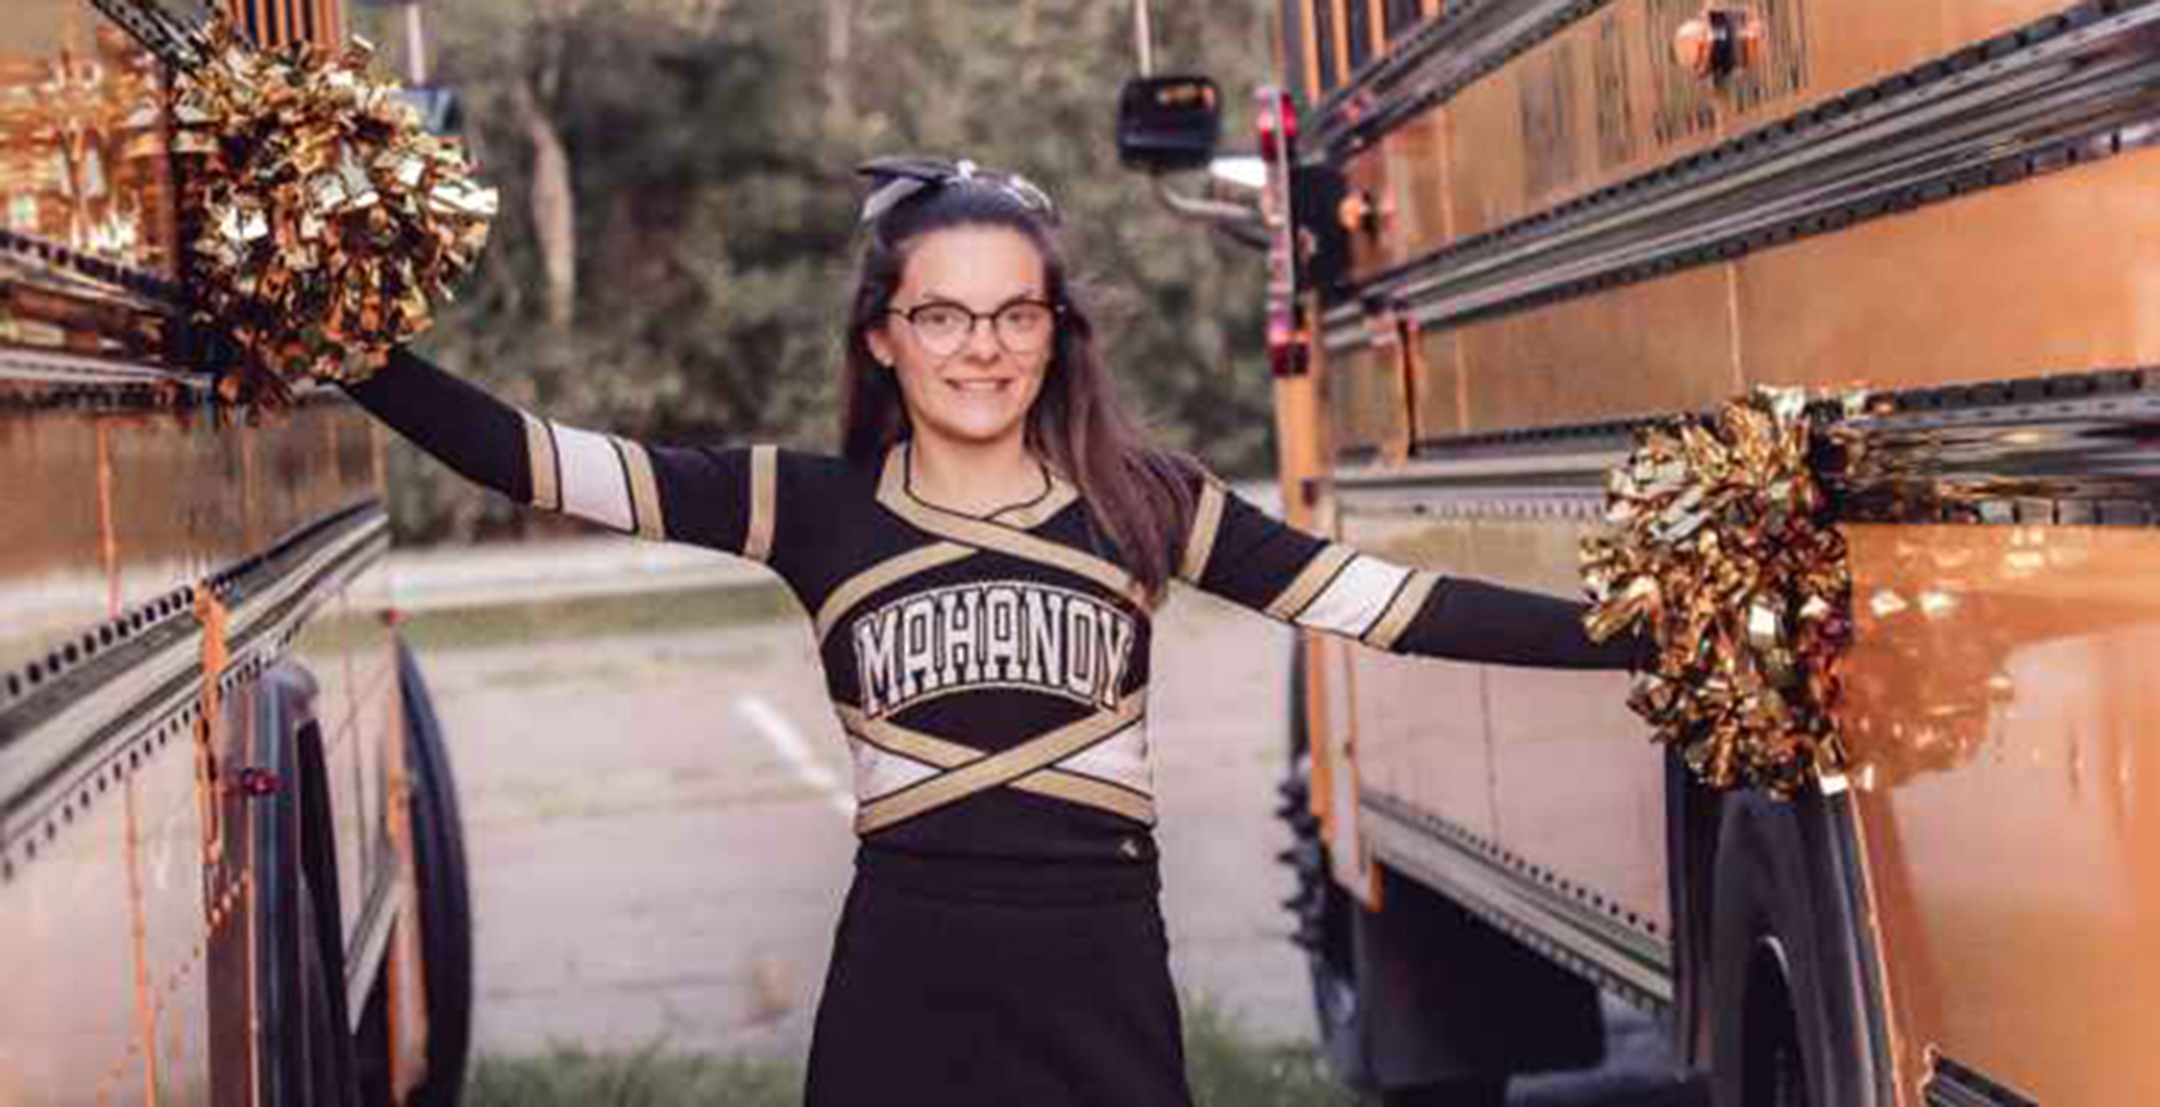 Young woman in a cheerleader outfit smiling and holding pom poms while standing between two school busses